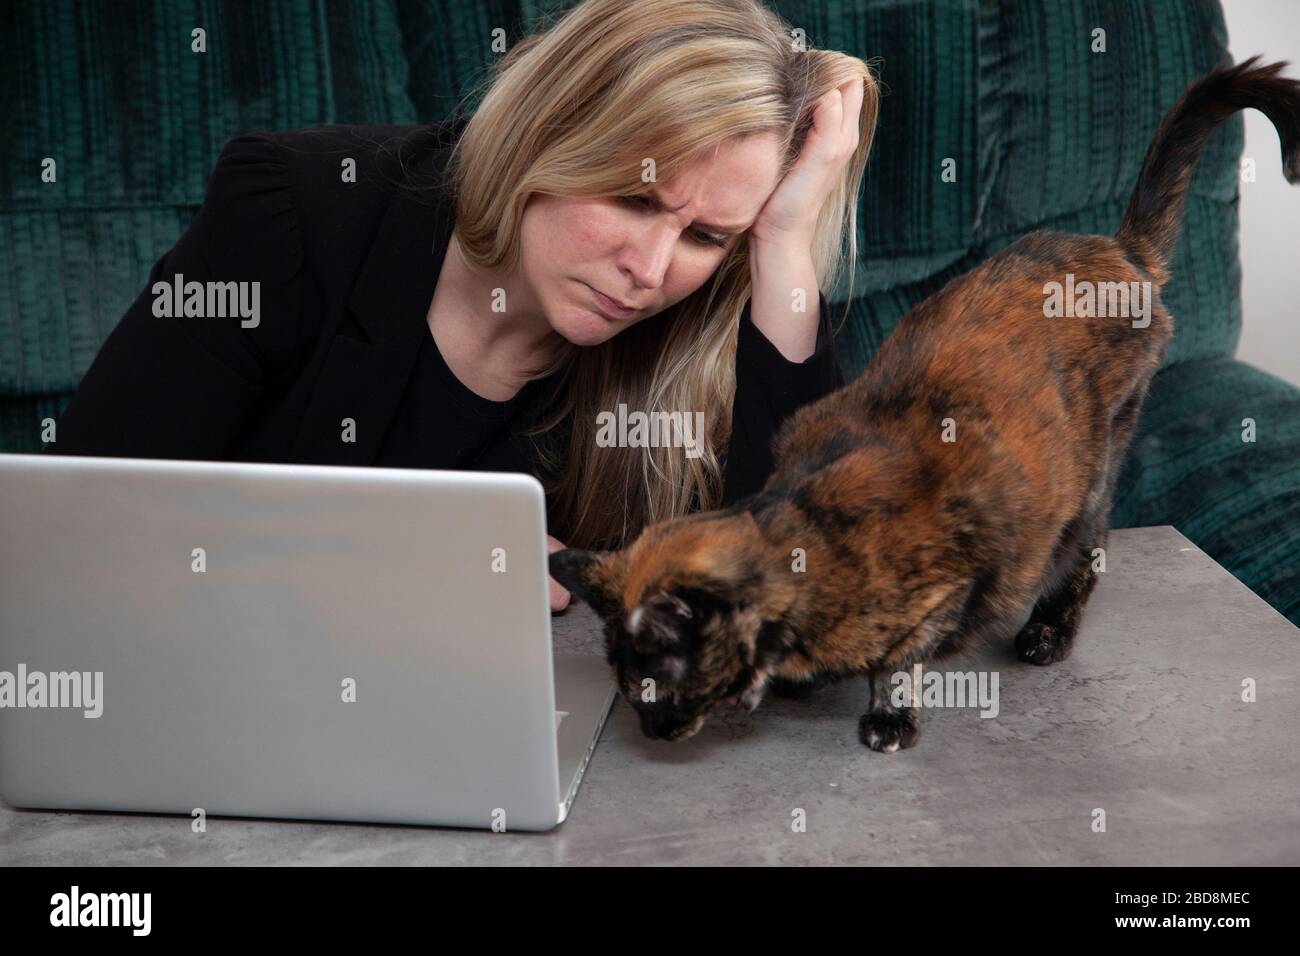 a cat climbs on top of the coffee table as a woman is dressed for work with laptop Stock Photo